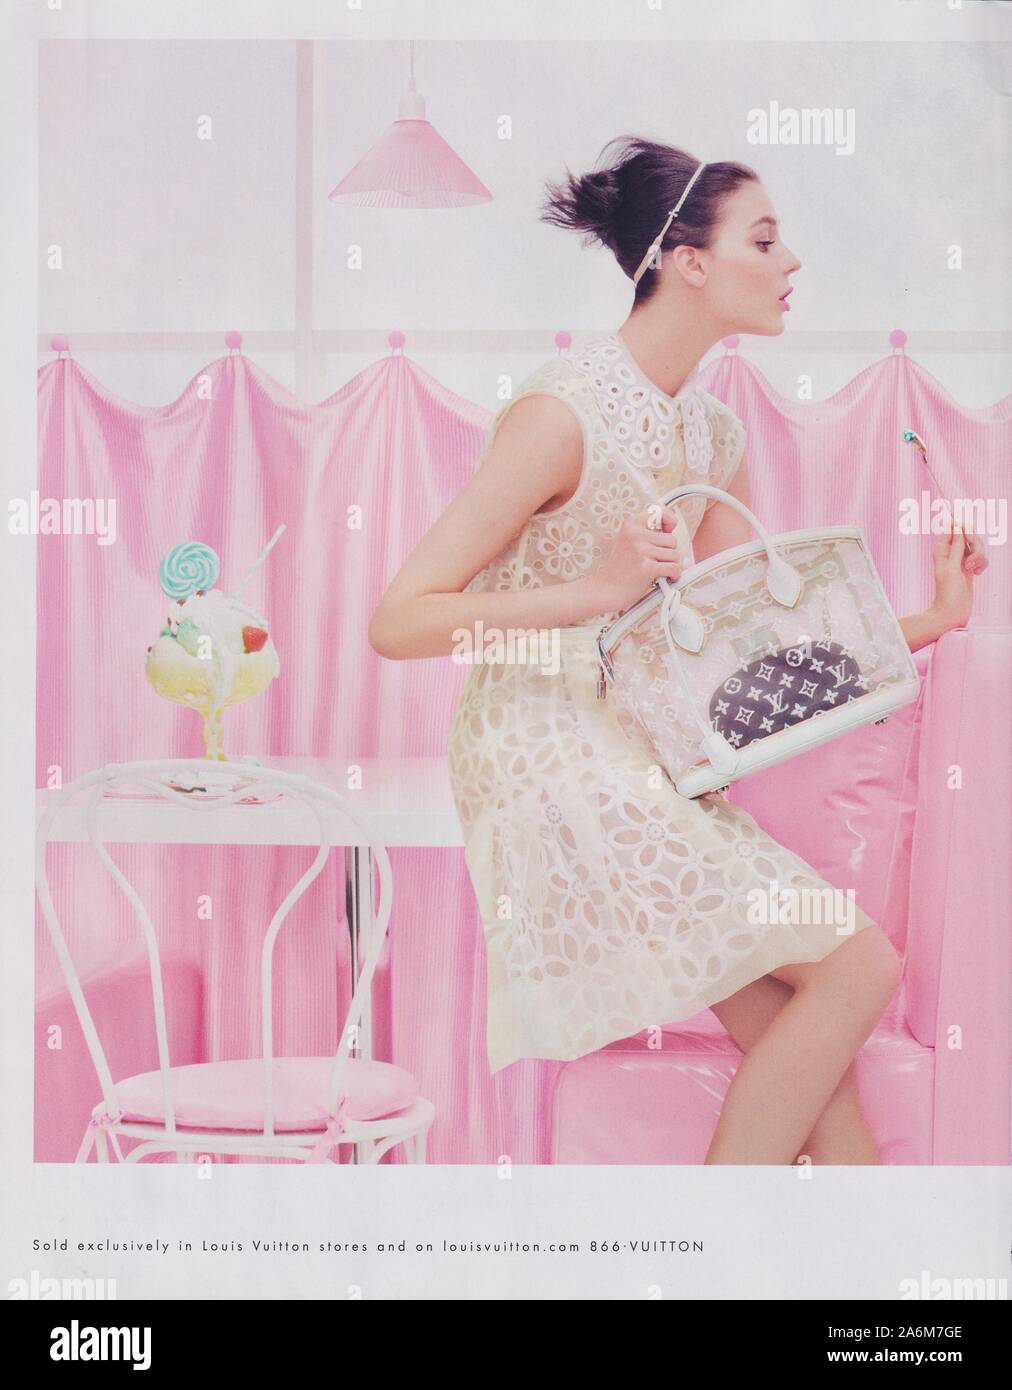 poster advertising Louis Vuitton handbag in paper magazine from 2015 year,  advertisement, creative LV Louis Vuitton advert from 2010s Stock Photo -  Alamy